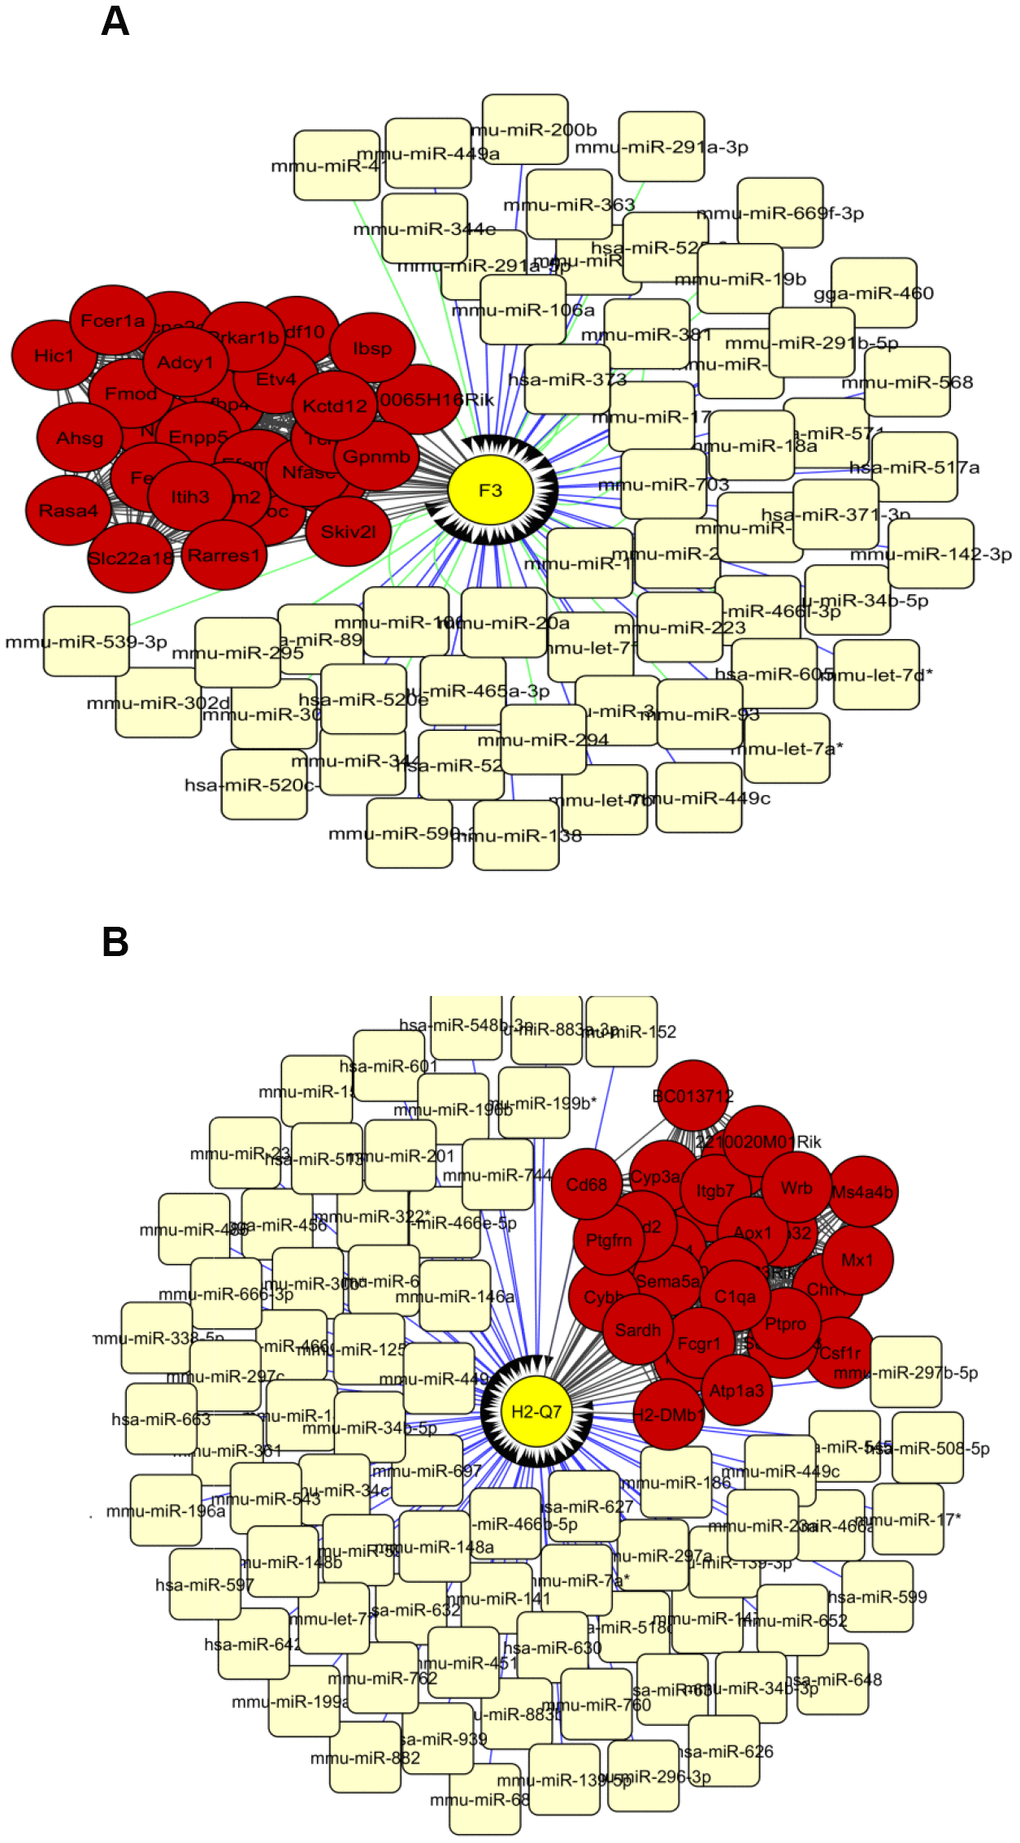 The network of top 30 interconnected genes in the turquoise (A) and blue (B) modules and predicted miRNAs from TargetScan and Microcosm. The hub genes are shown in red and miRNAs in light yellow. mRNA-miRNA interactions from TargetScan and Microcosm are shown in green and blue lines respectively. Yellow circles show the genes that are putatively regulated by miRNAs.